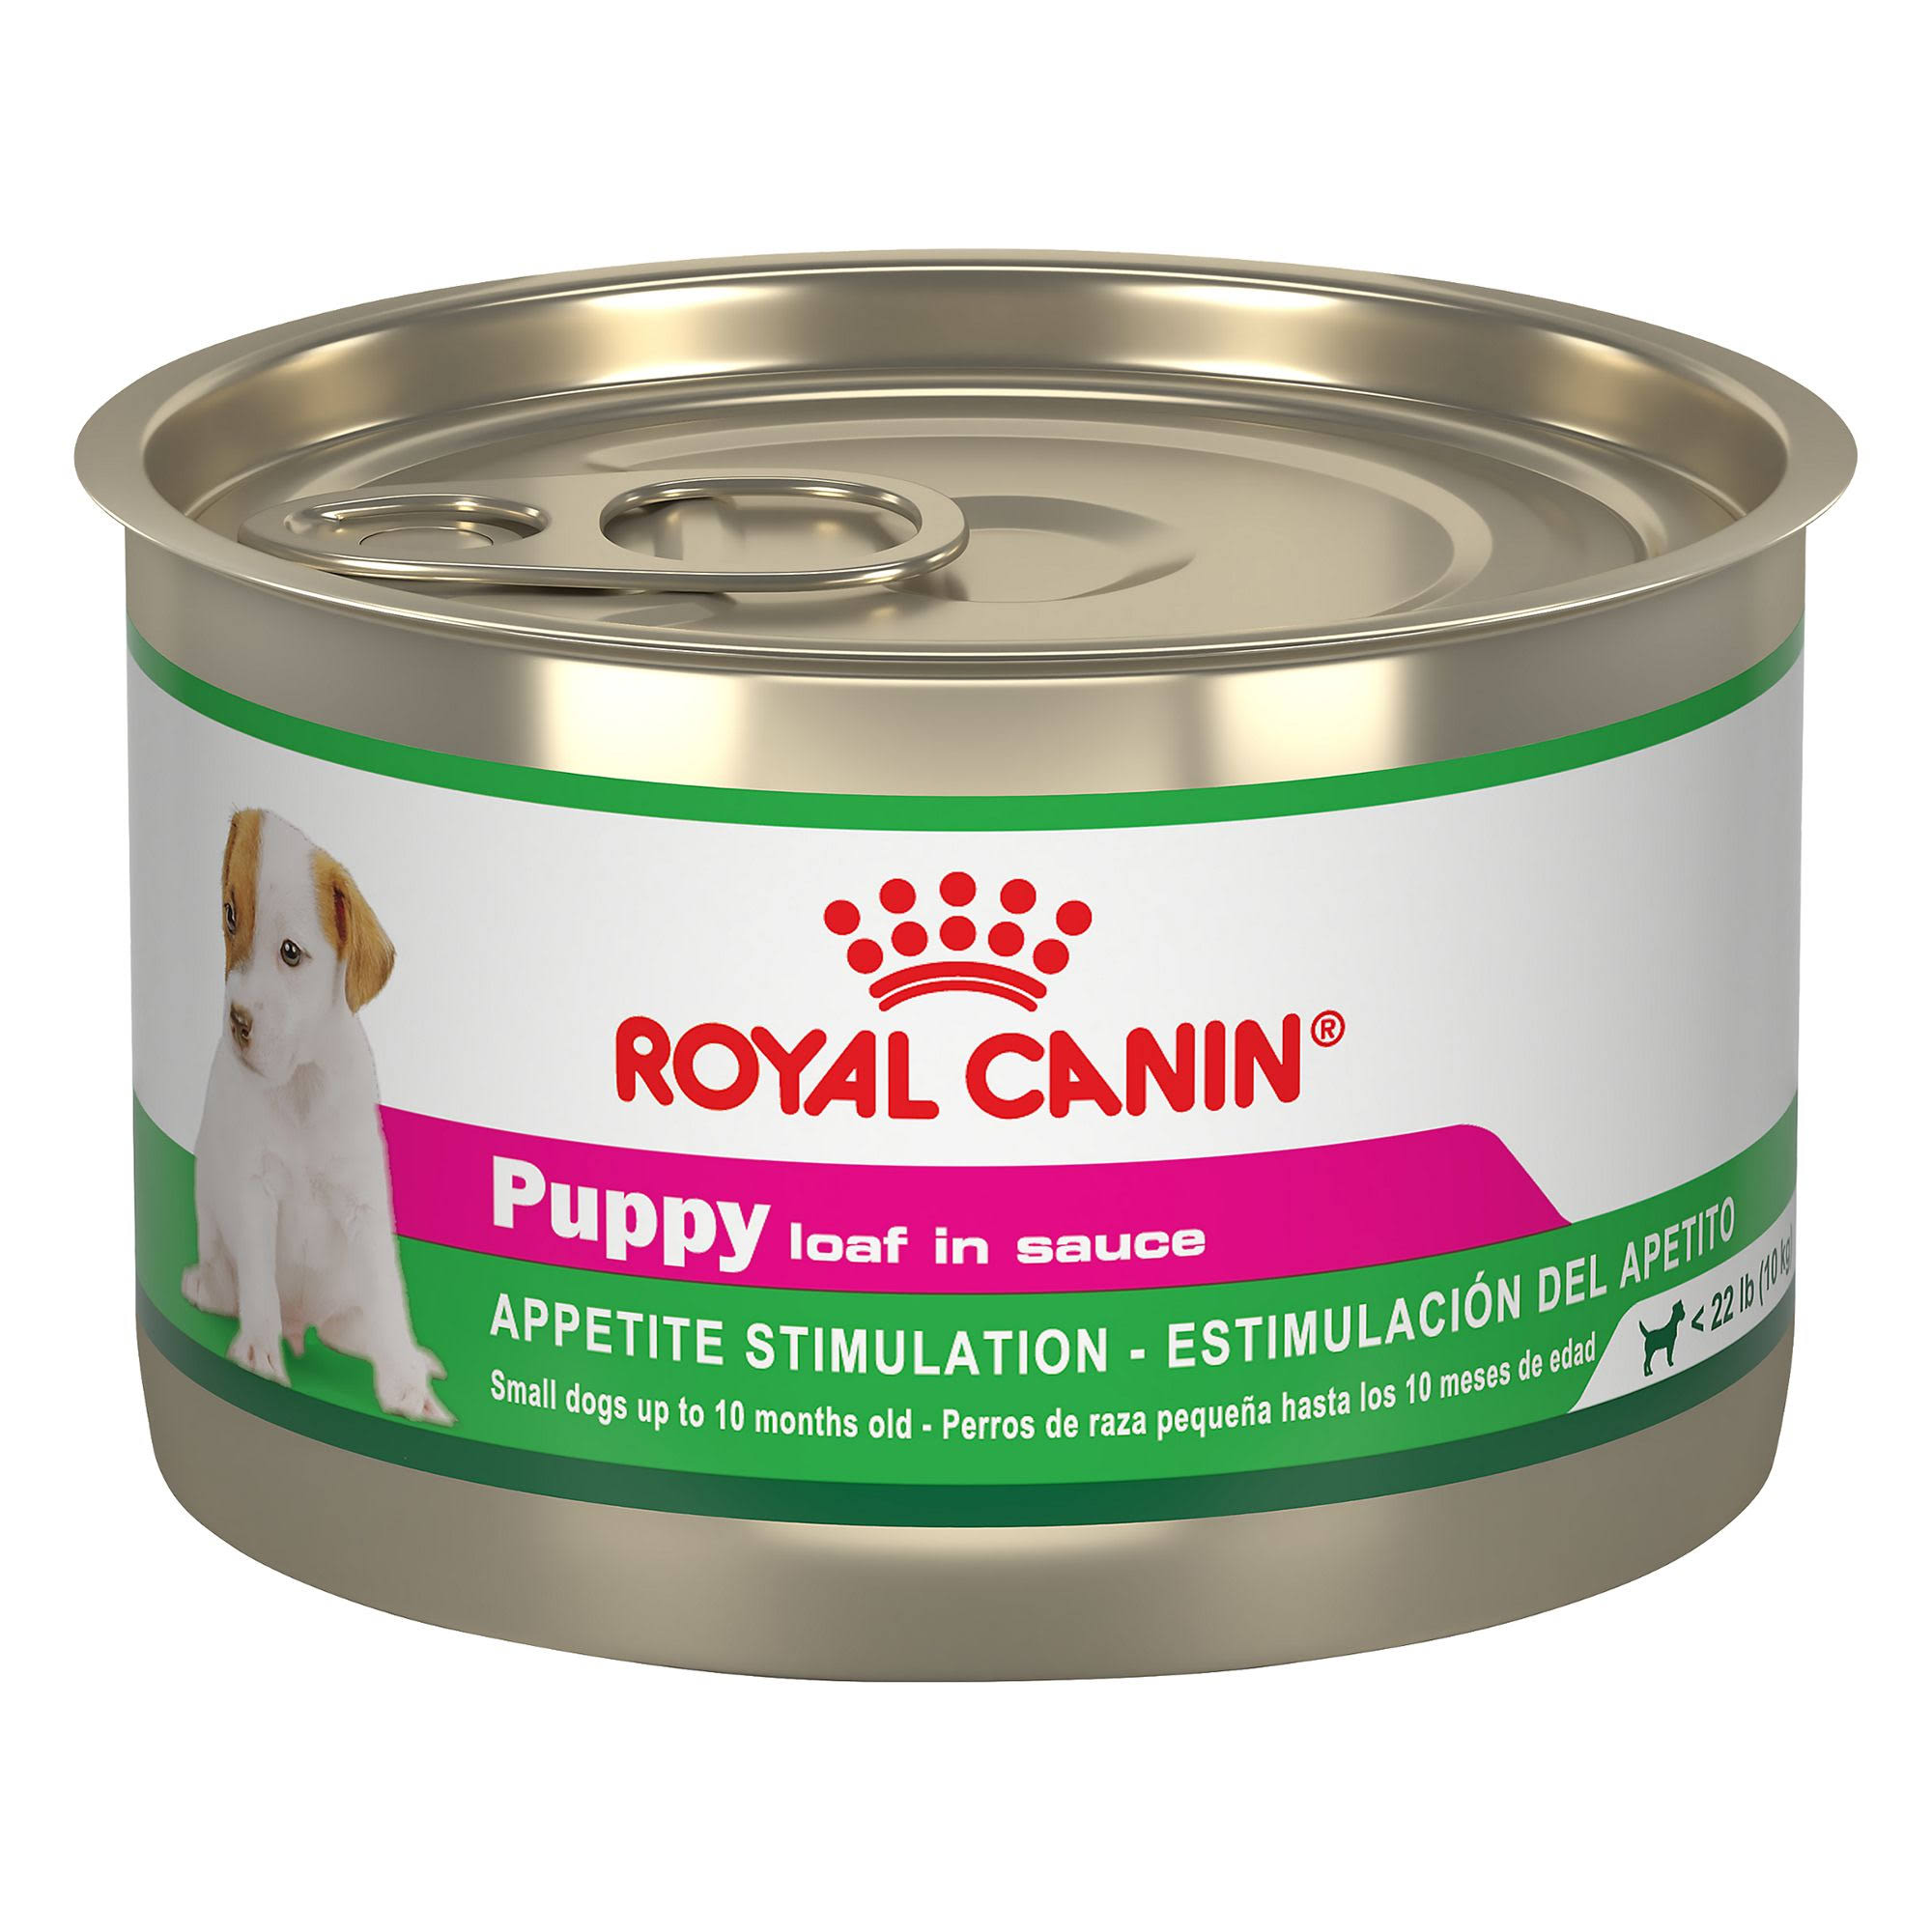 Royal Canin Canine Health Nutrition Puppy Loaf in Sauce Canned Dog Food, 5.2 oz.